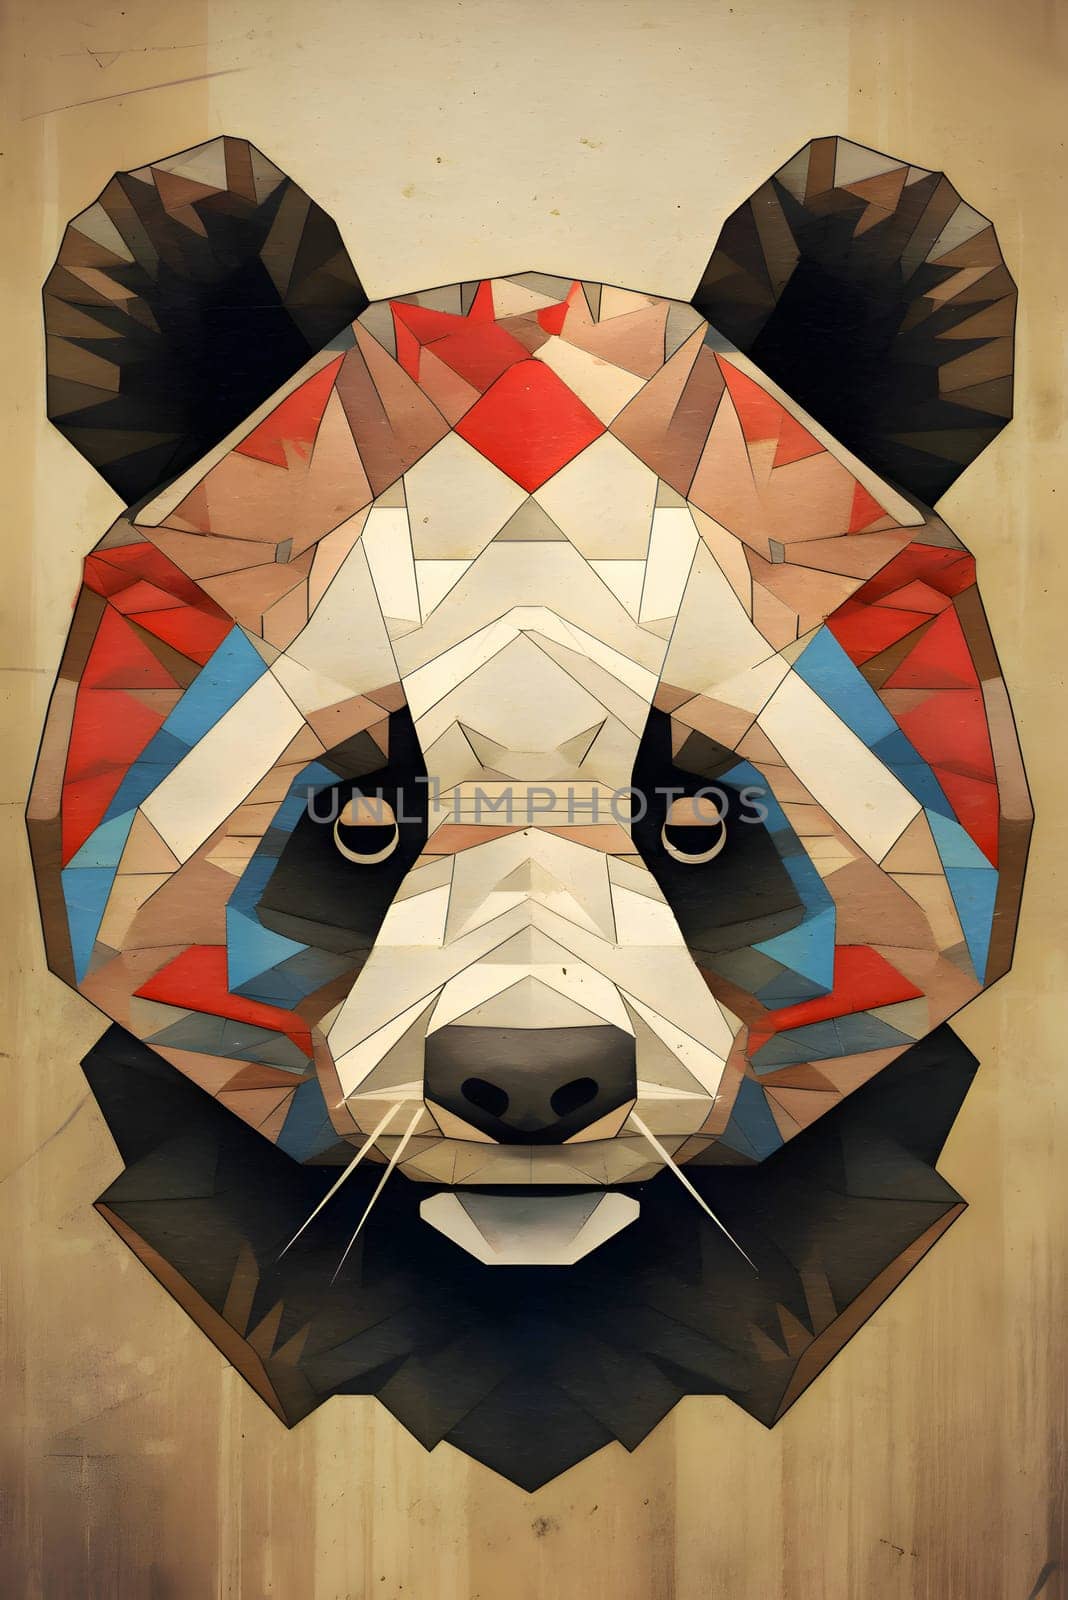 Abstract illustration: Panda bear on grunge paper background. Abstract polygonal illustration.